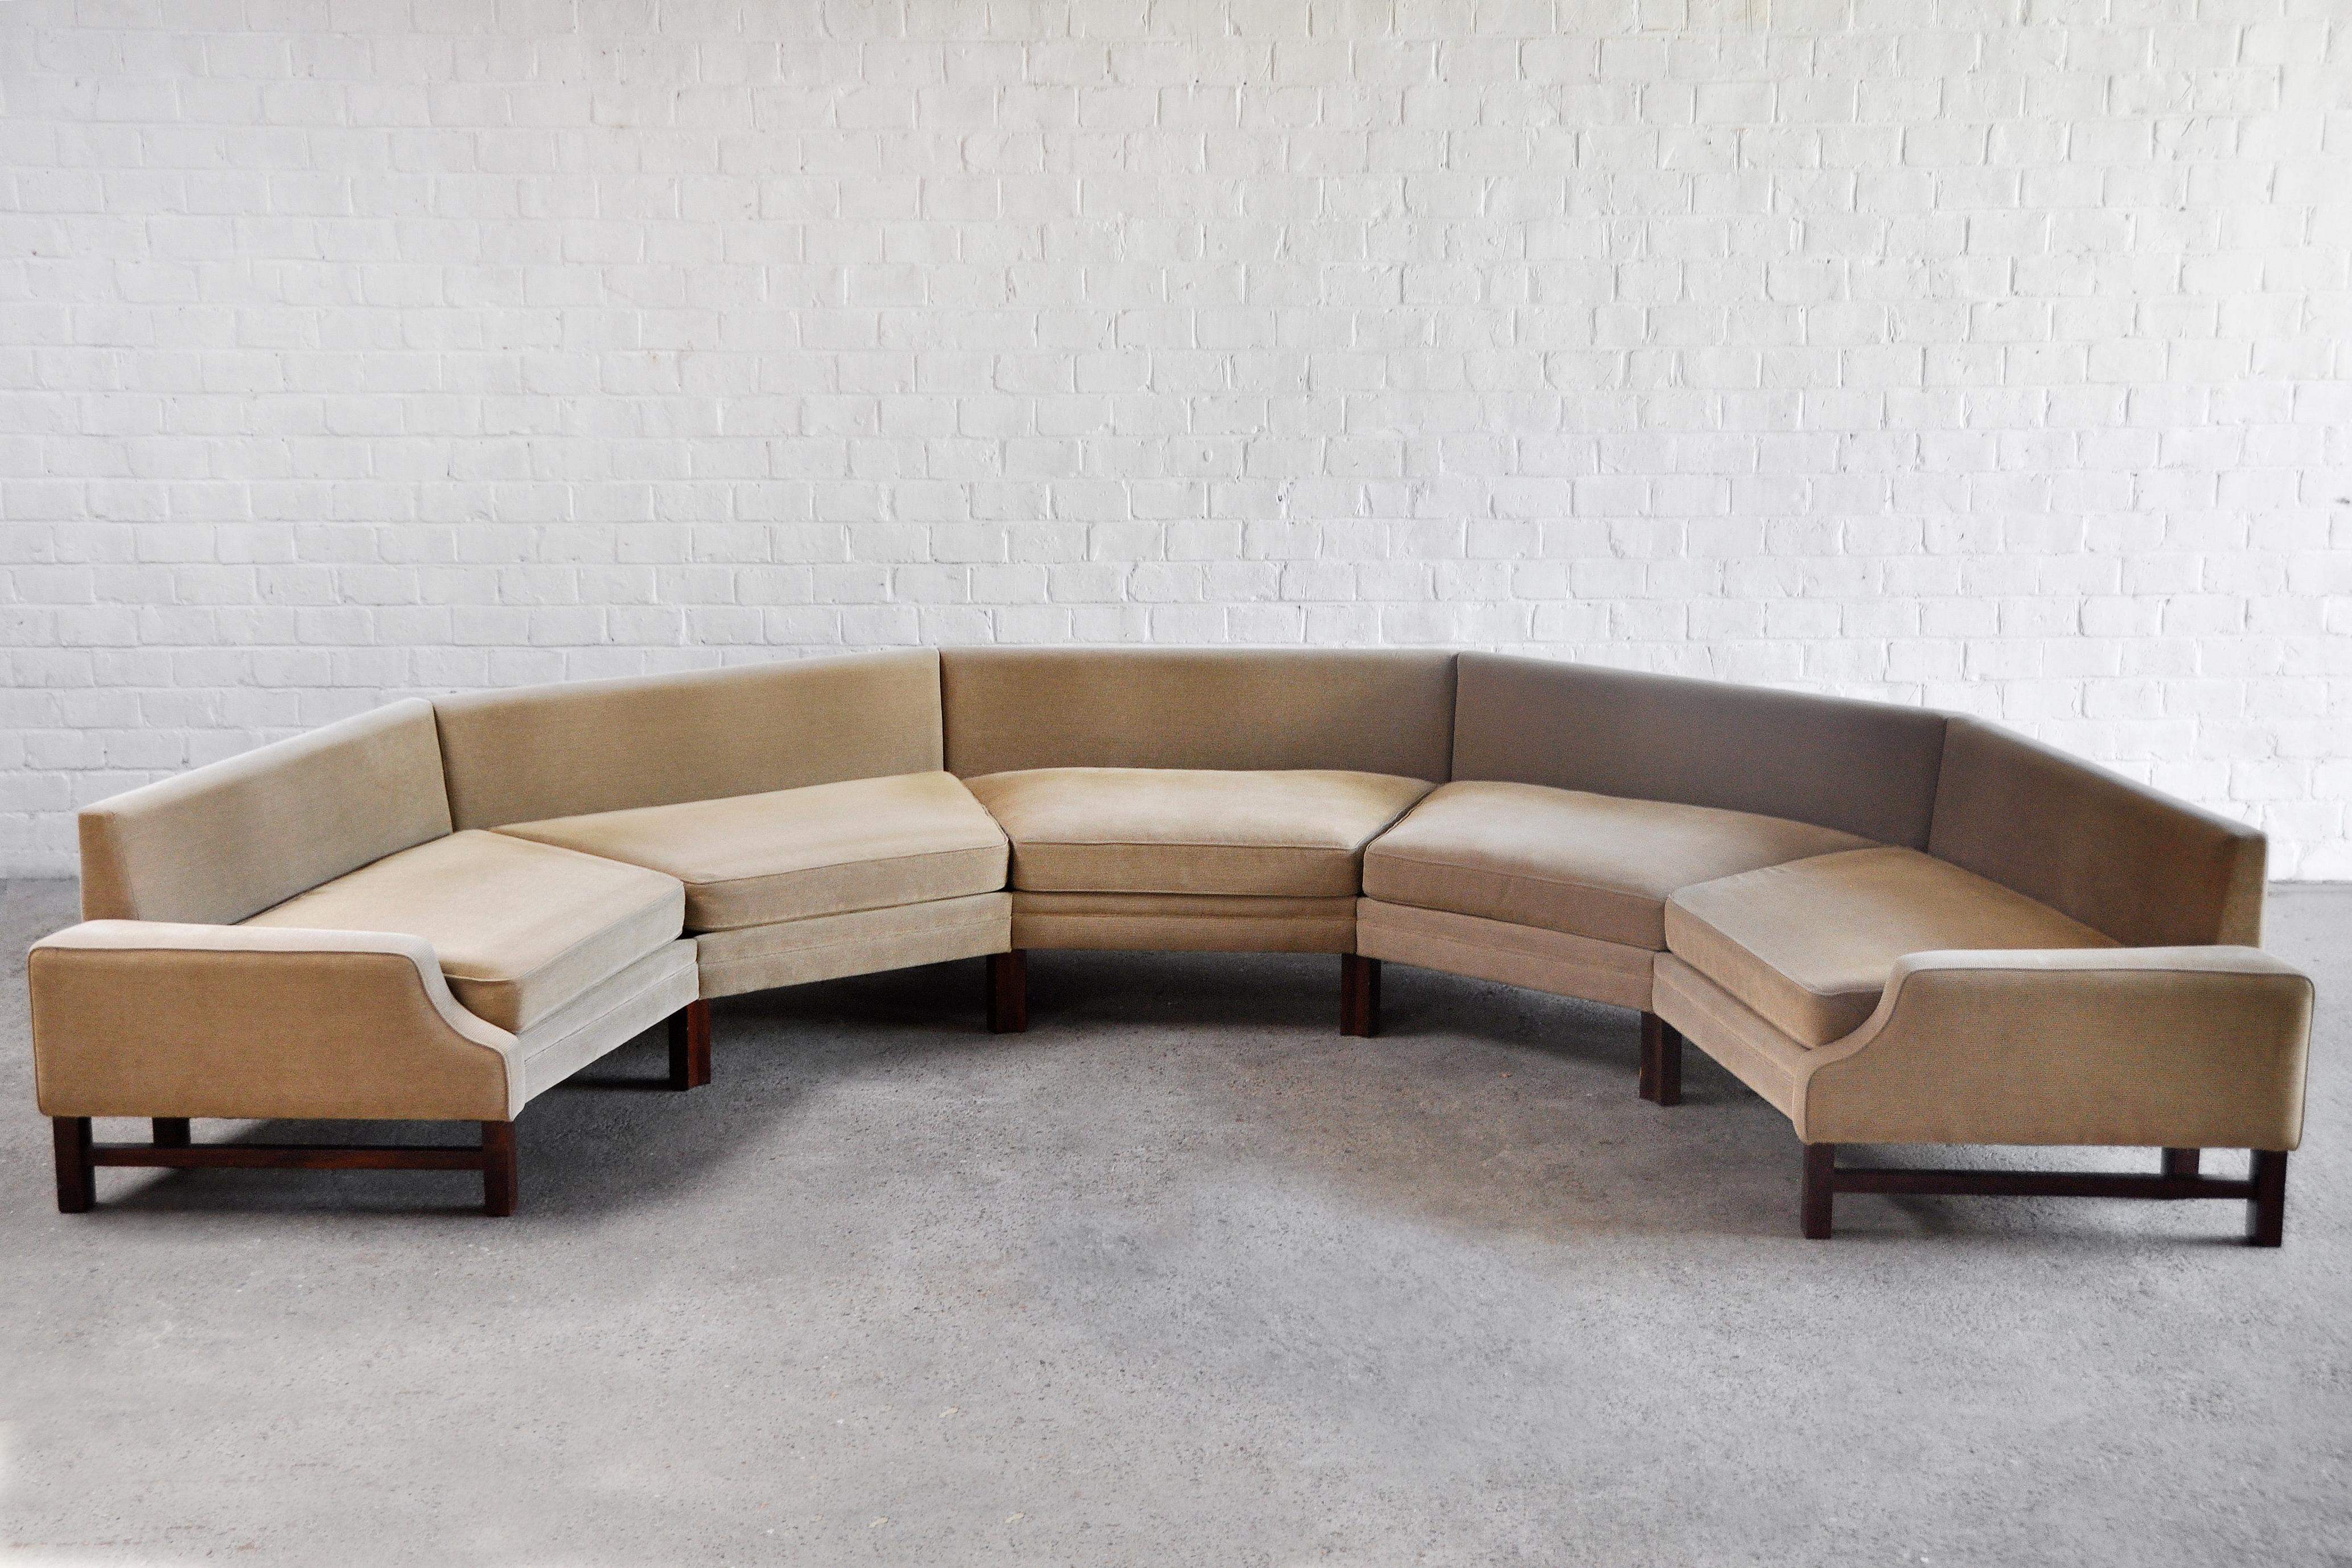 A large curved sectional sofa, custom produced and designed in Italy in the late 1970s. This sofa is a 1/1 bespoke made model, designed for the interior project of a Modernist/midcentury villa build in the 1970s. A very unique and decorative piece